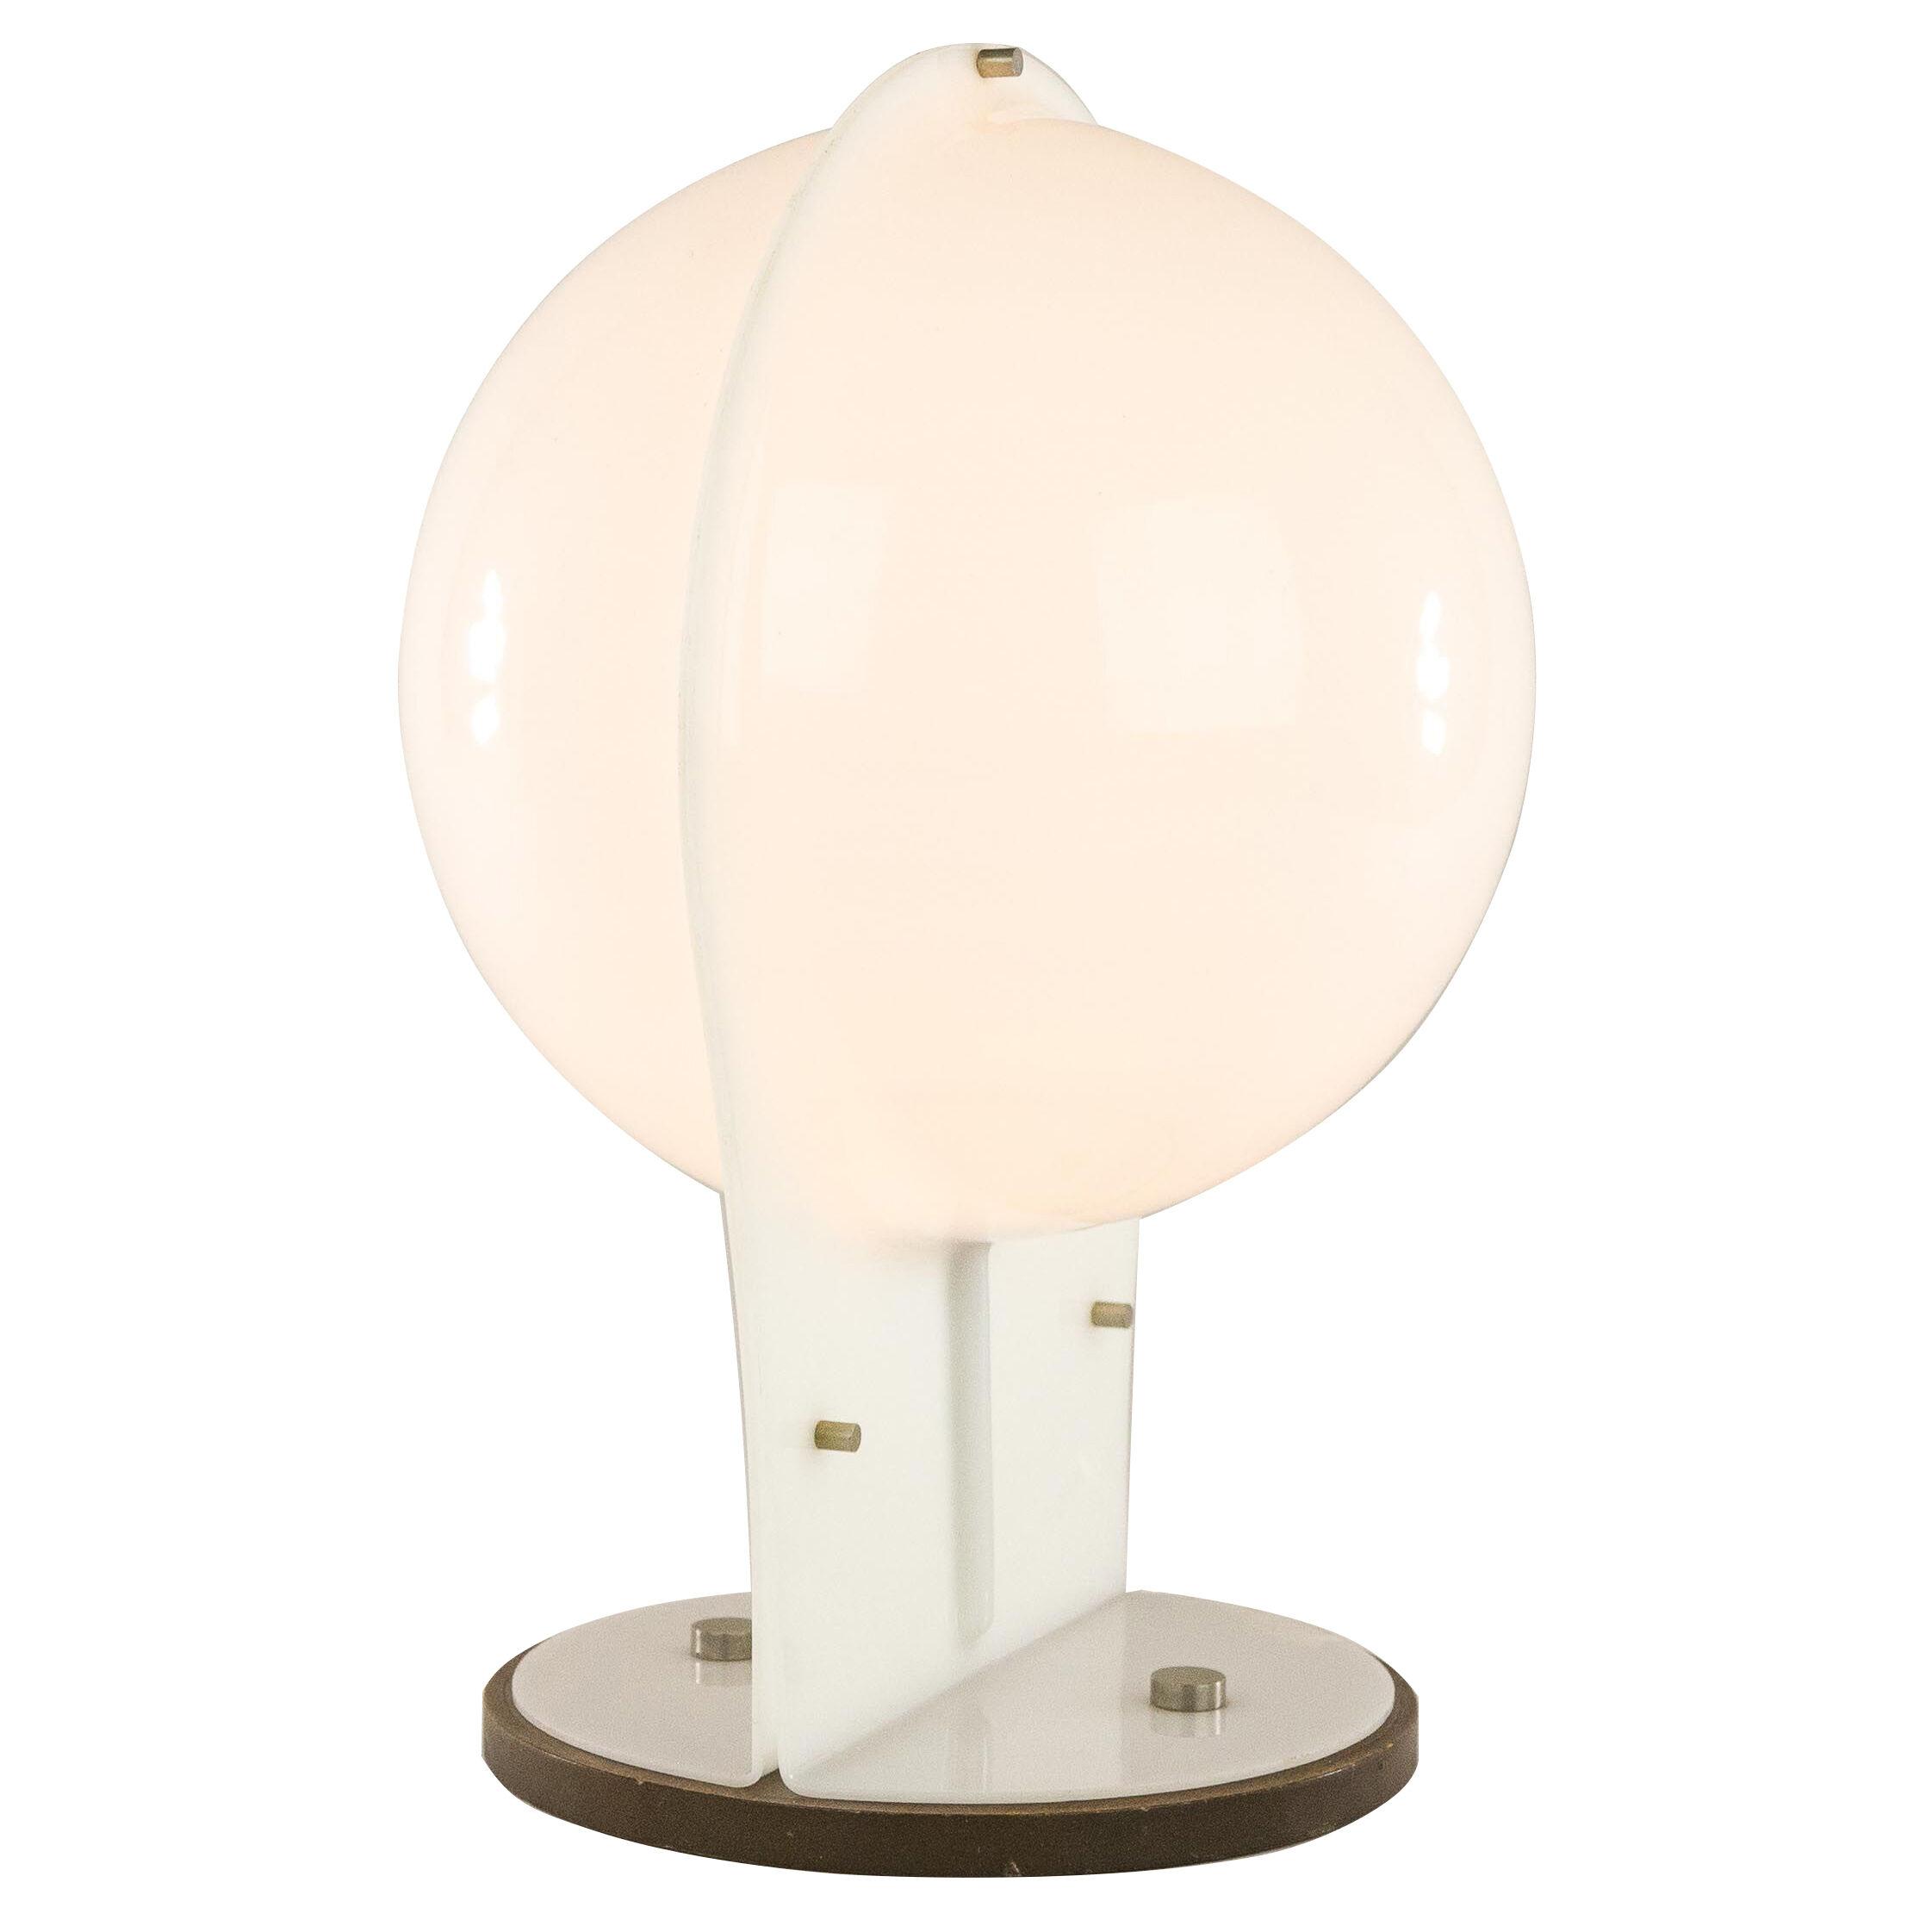 White table lamp made of two molded plastic half-spheres with wooden base, 1970s